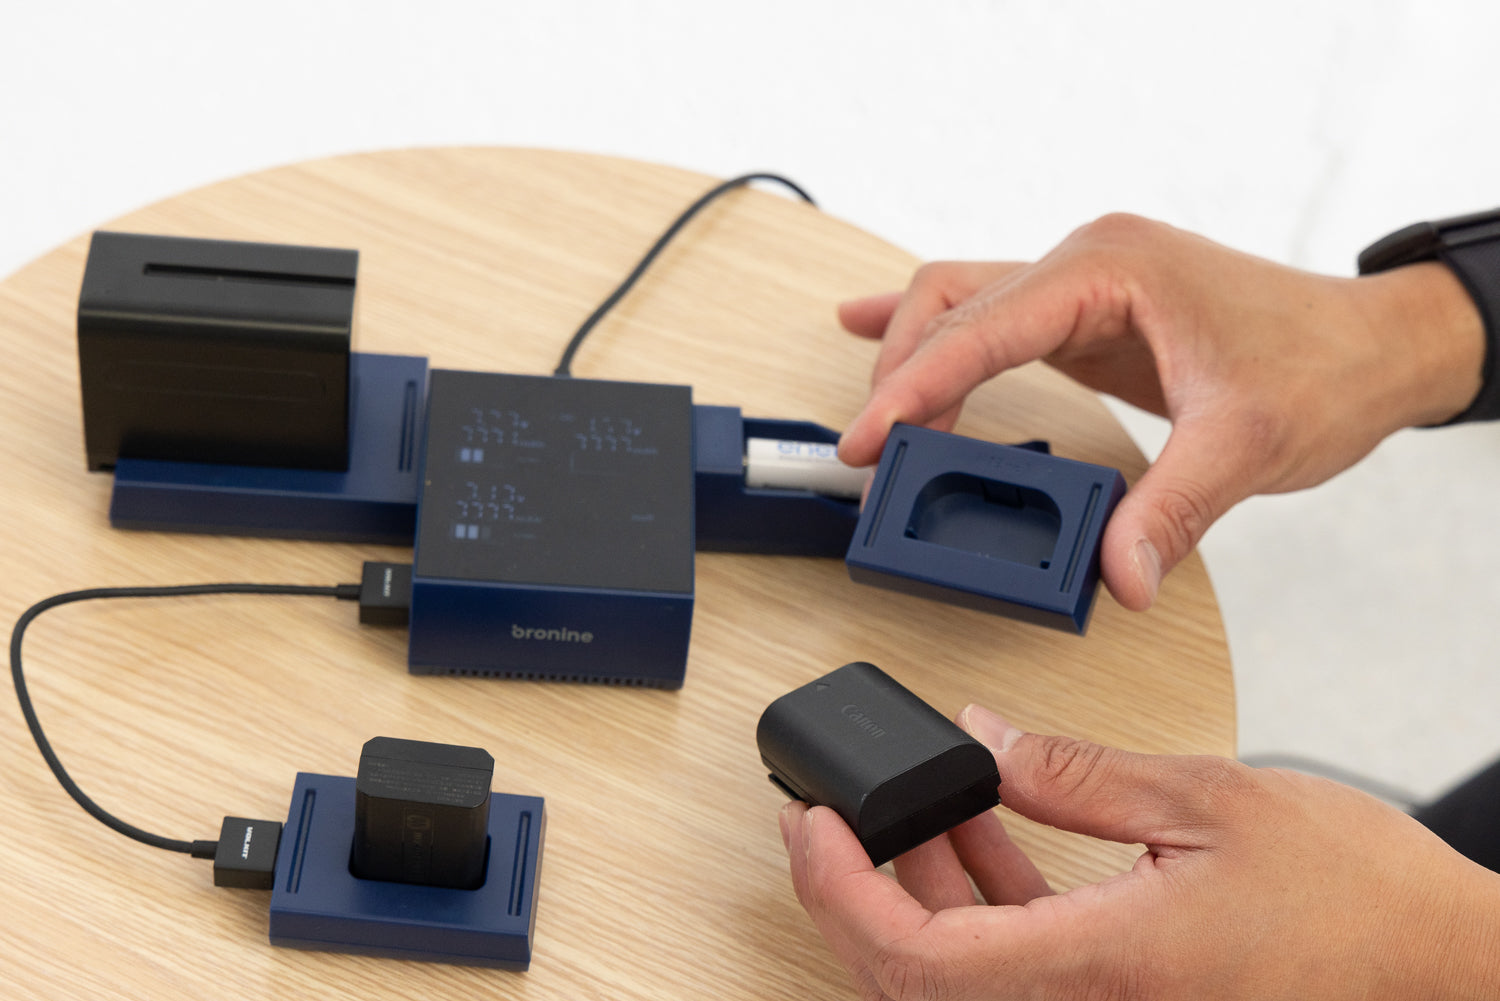 An image of a hand holding a camera battery and plugging it into one of the four ports of a Bronine 4-port multi-charger, which is sitting on a wooden table. The charger is currently active and charging the various camera batteries, with LED lights indicating their progress. Three other camera batteries are also plugged into the charger's remaining ports.